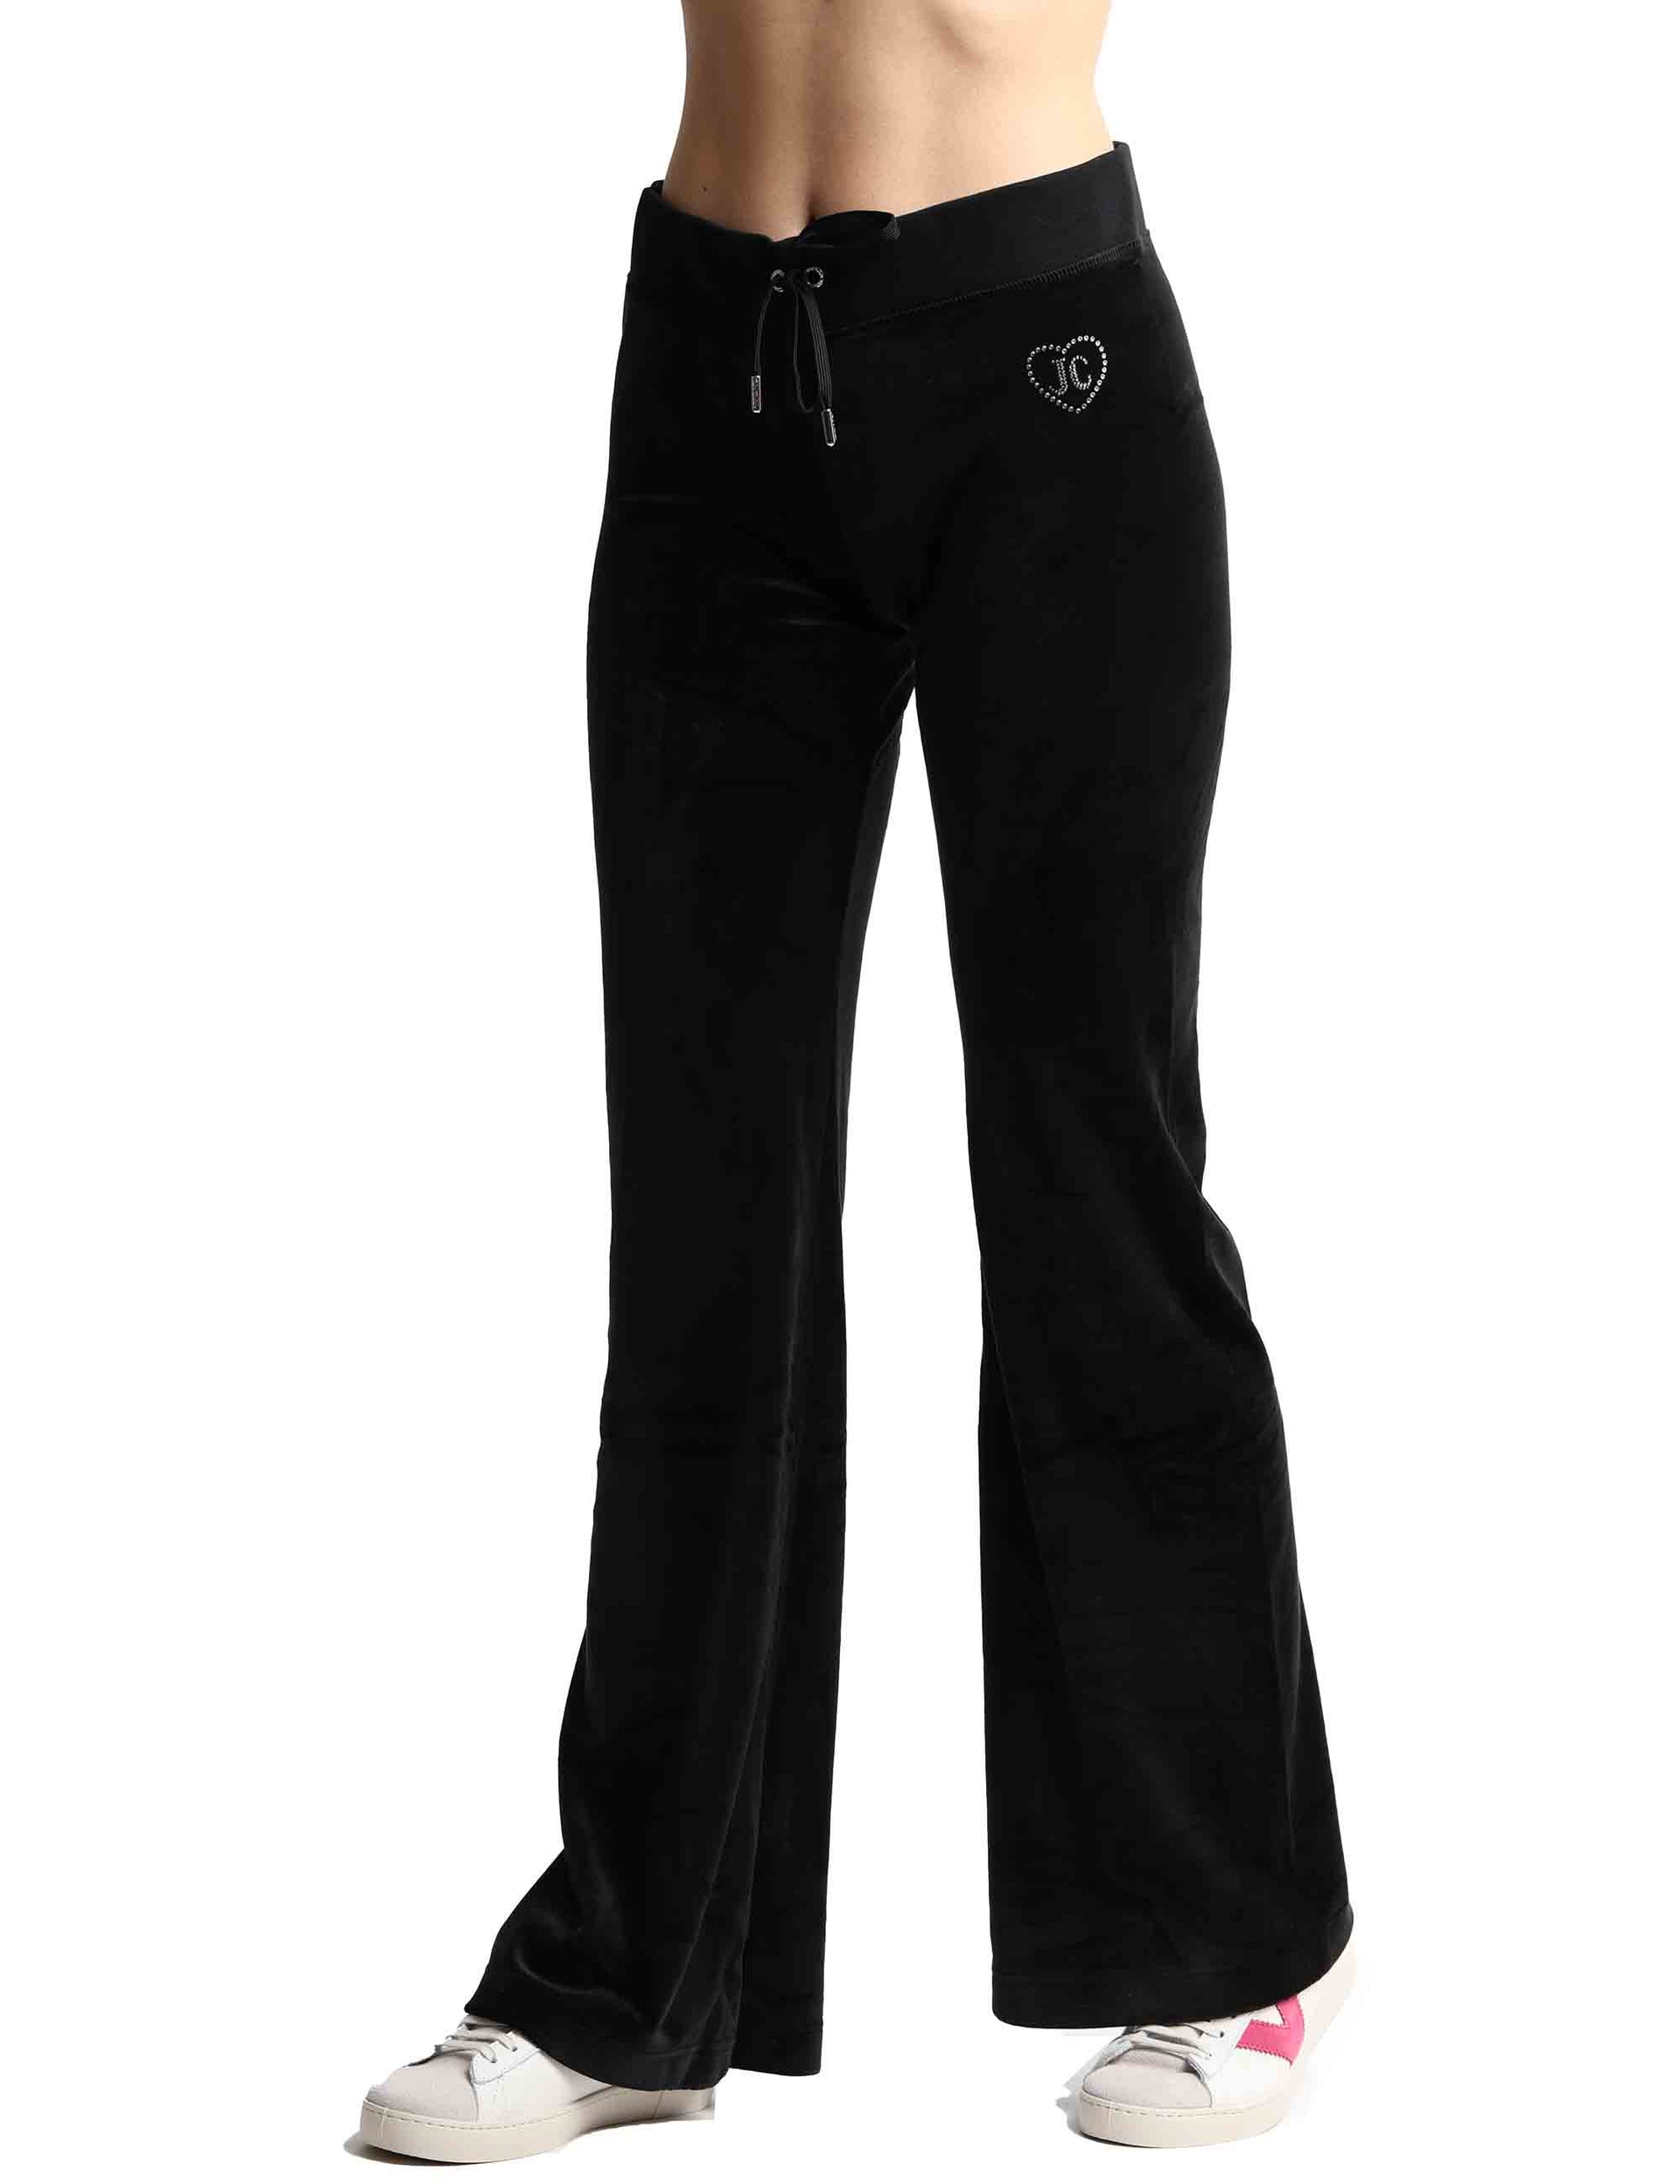 Rodeo Layla women's tracksuit trousers in black fabric with rhinestones